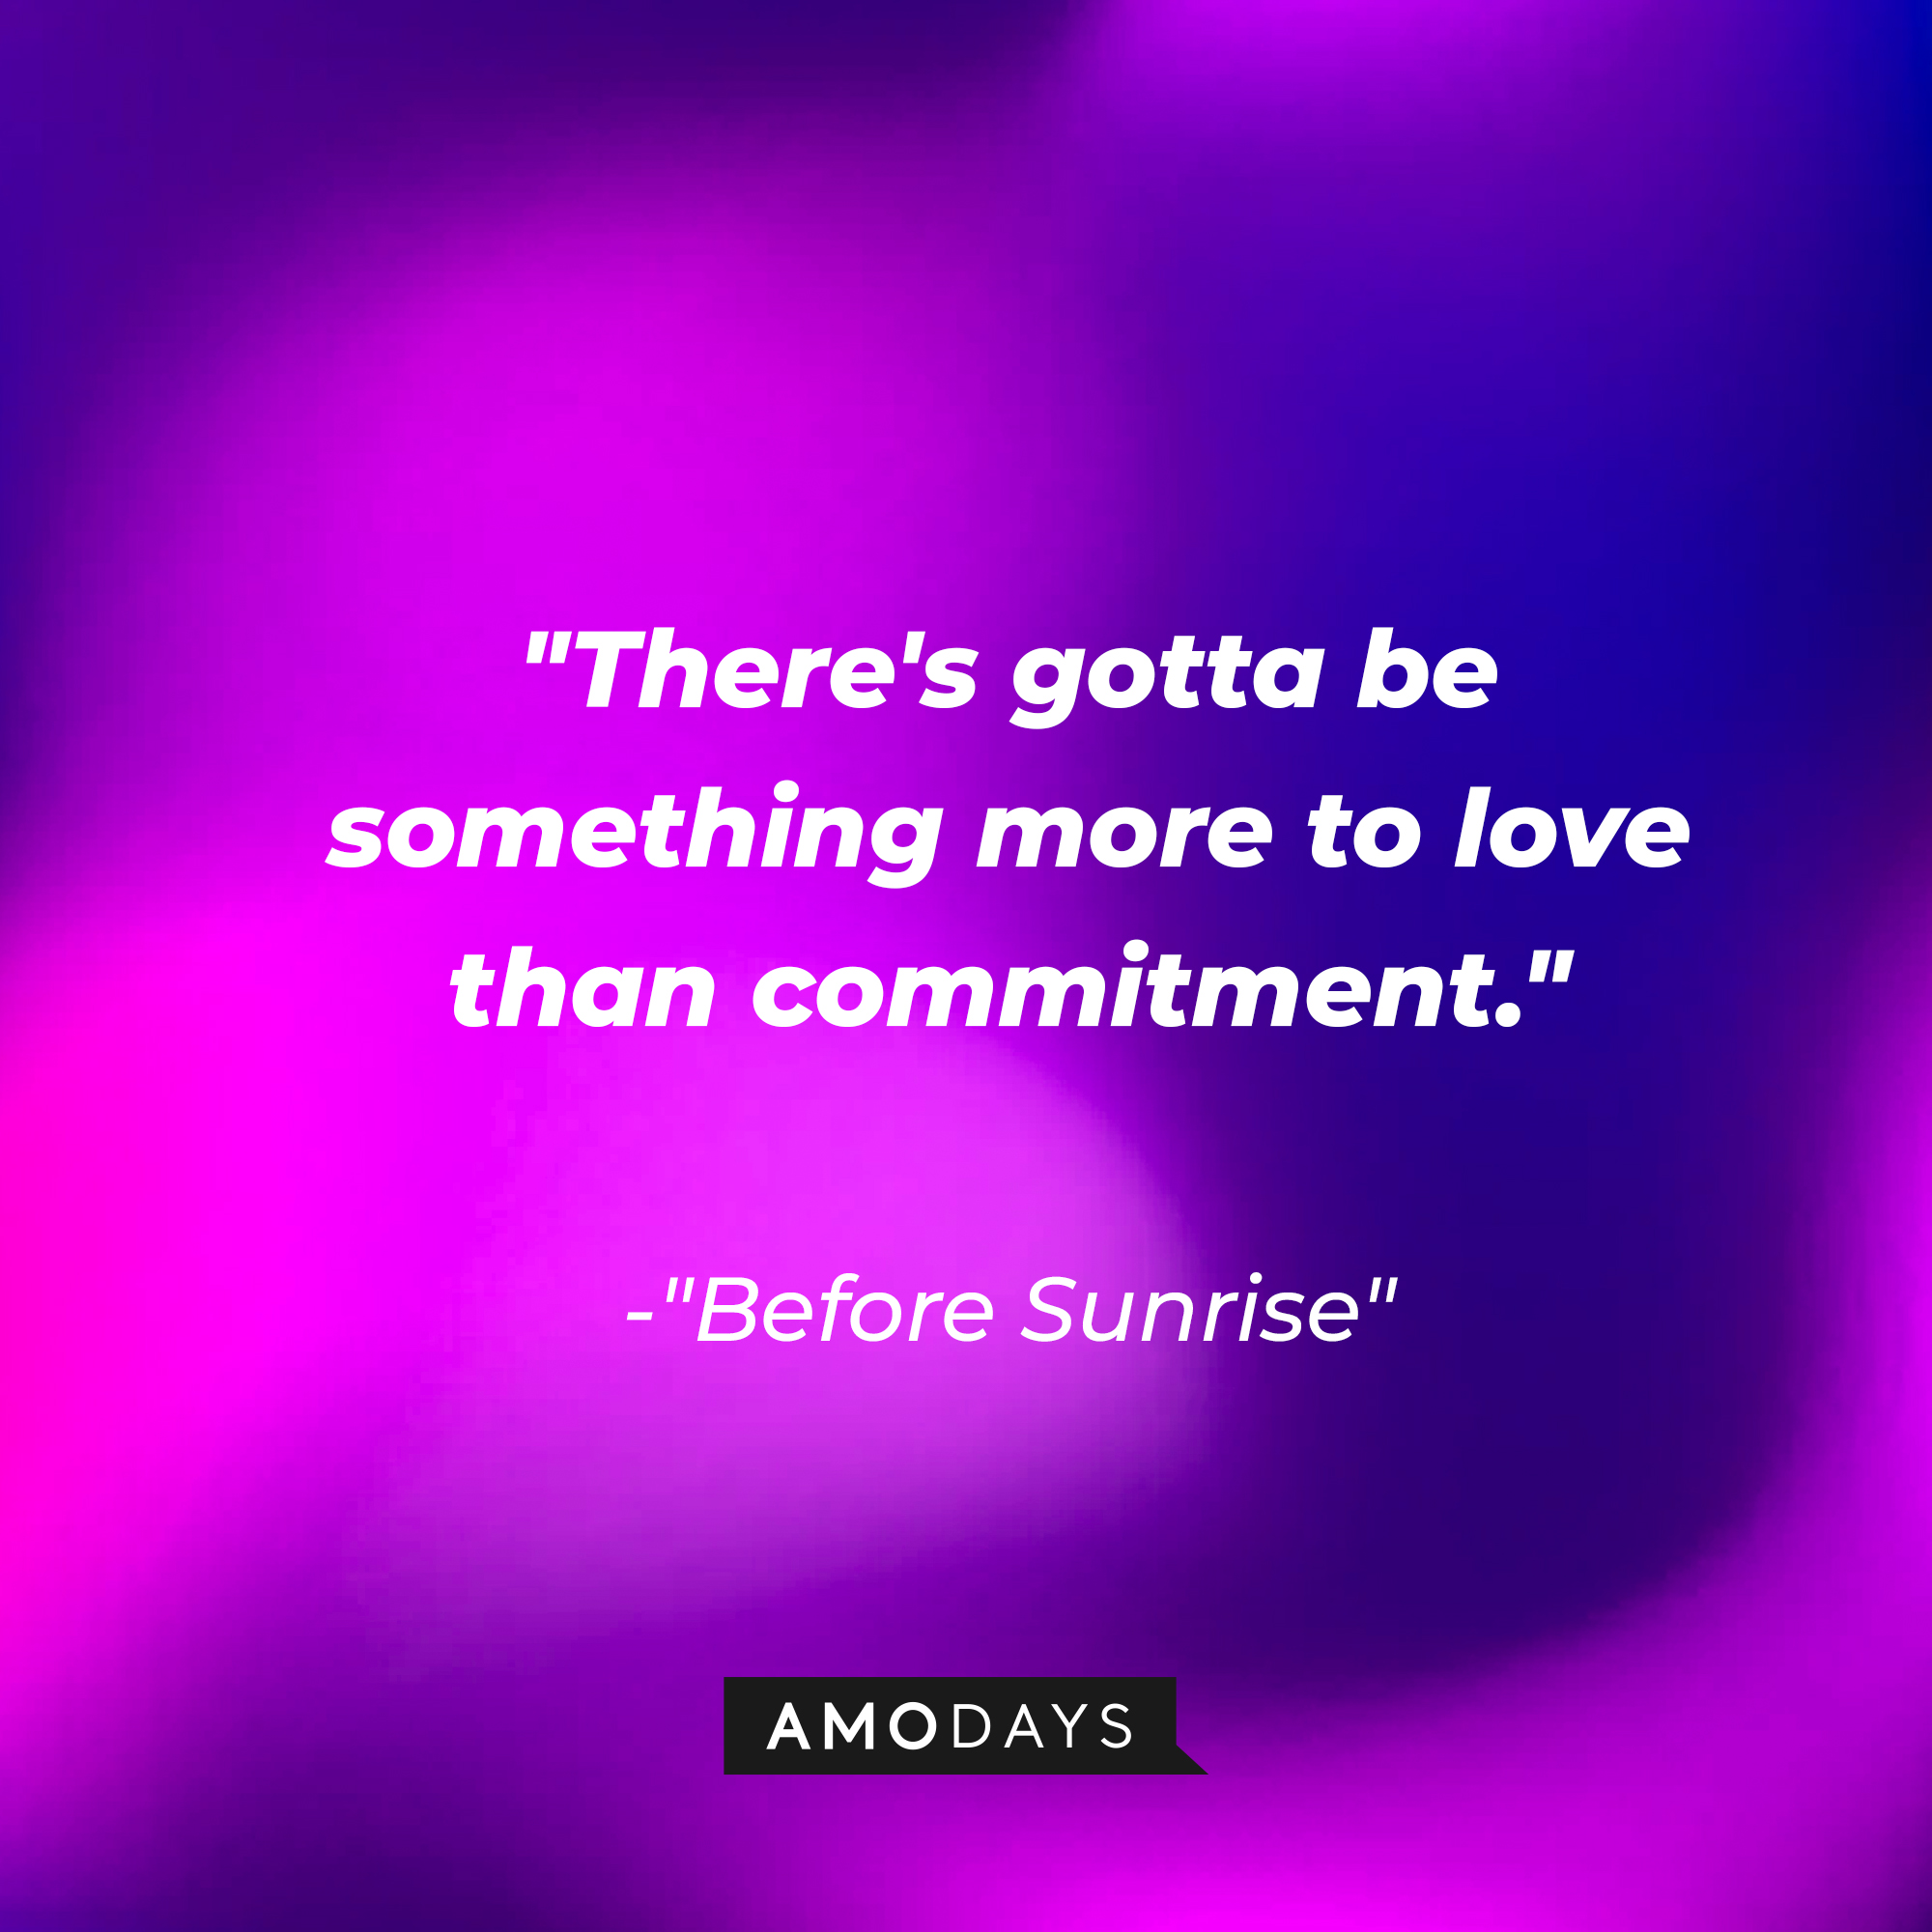 "Before Sunrise" quote: "There's gotta be something more to love than commitment." | Source: AmoDays